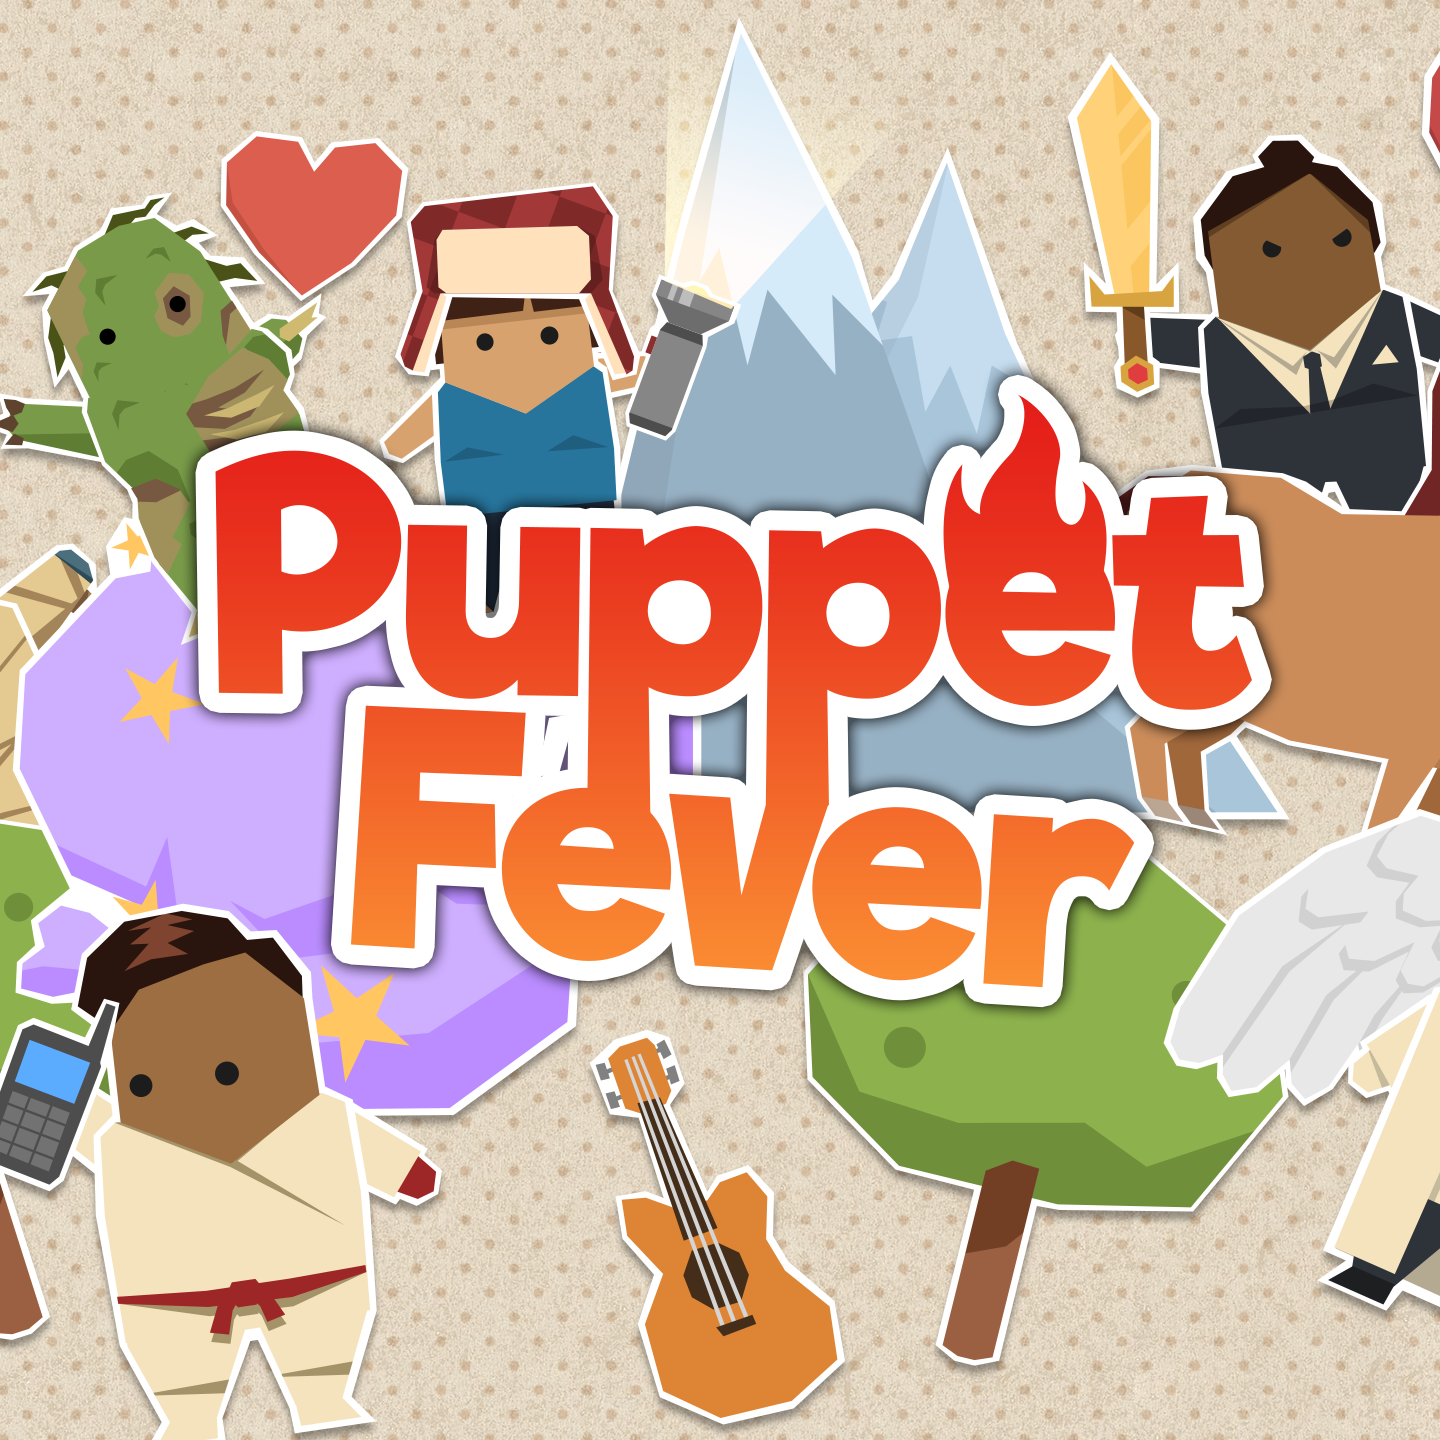 Image of Puppet Fever